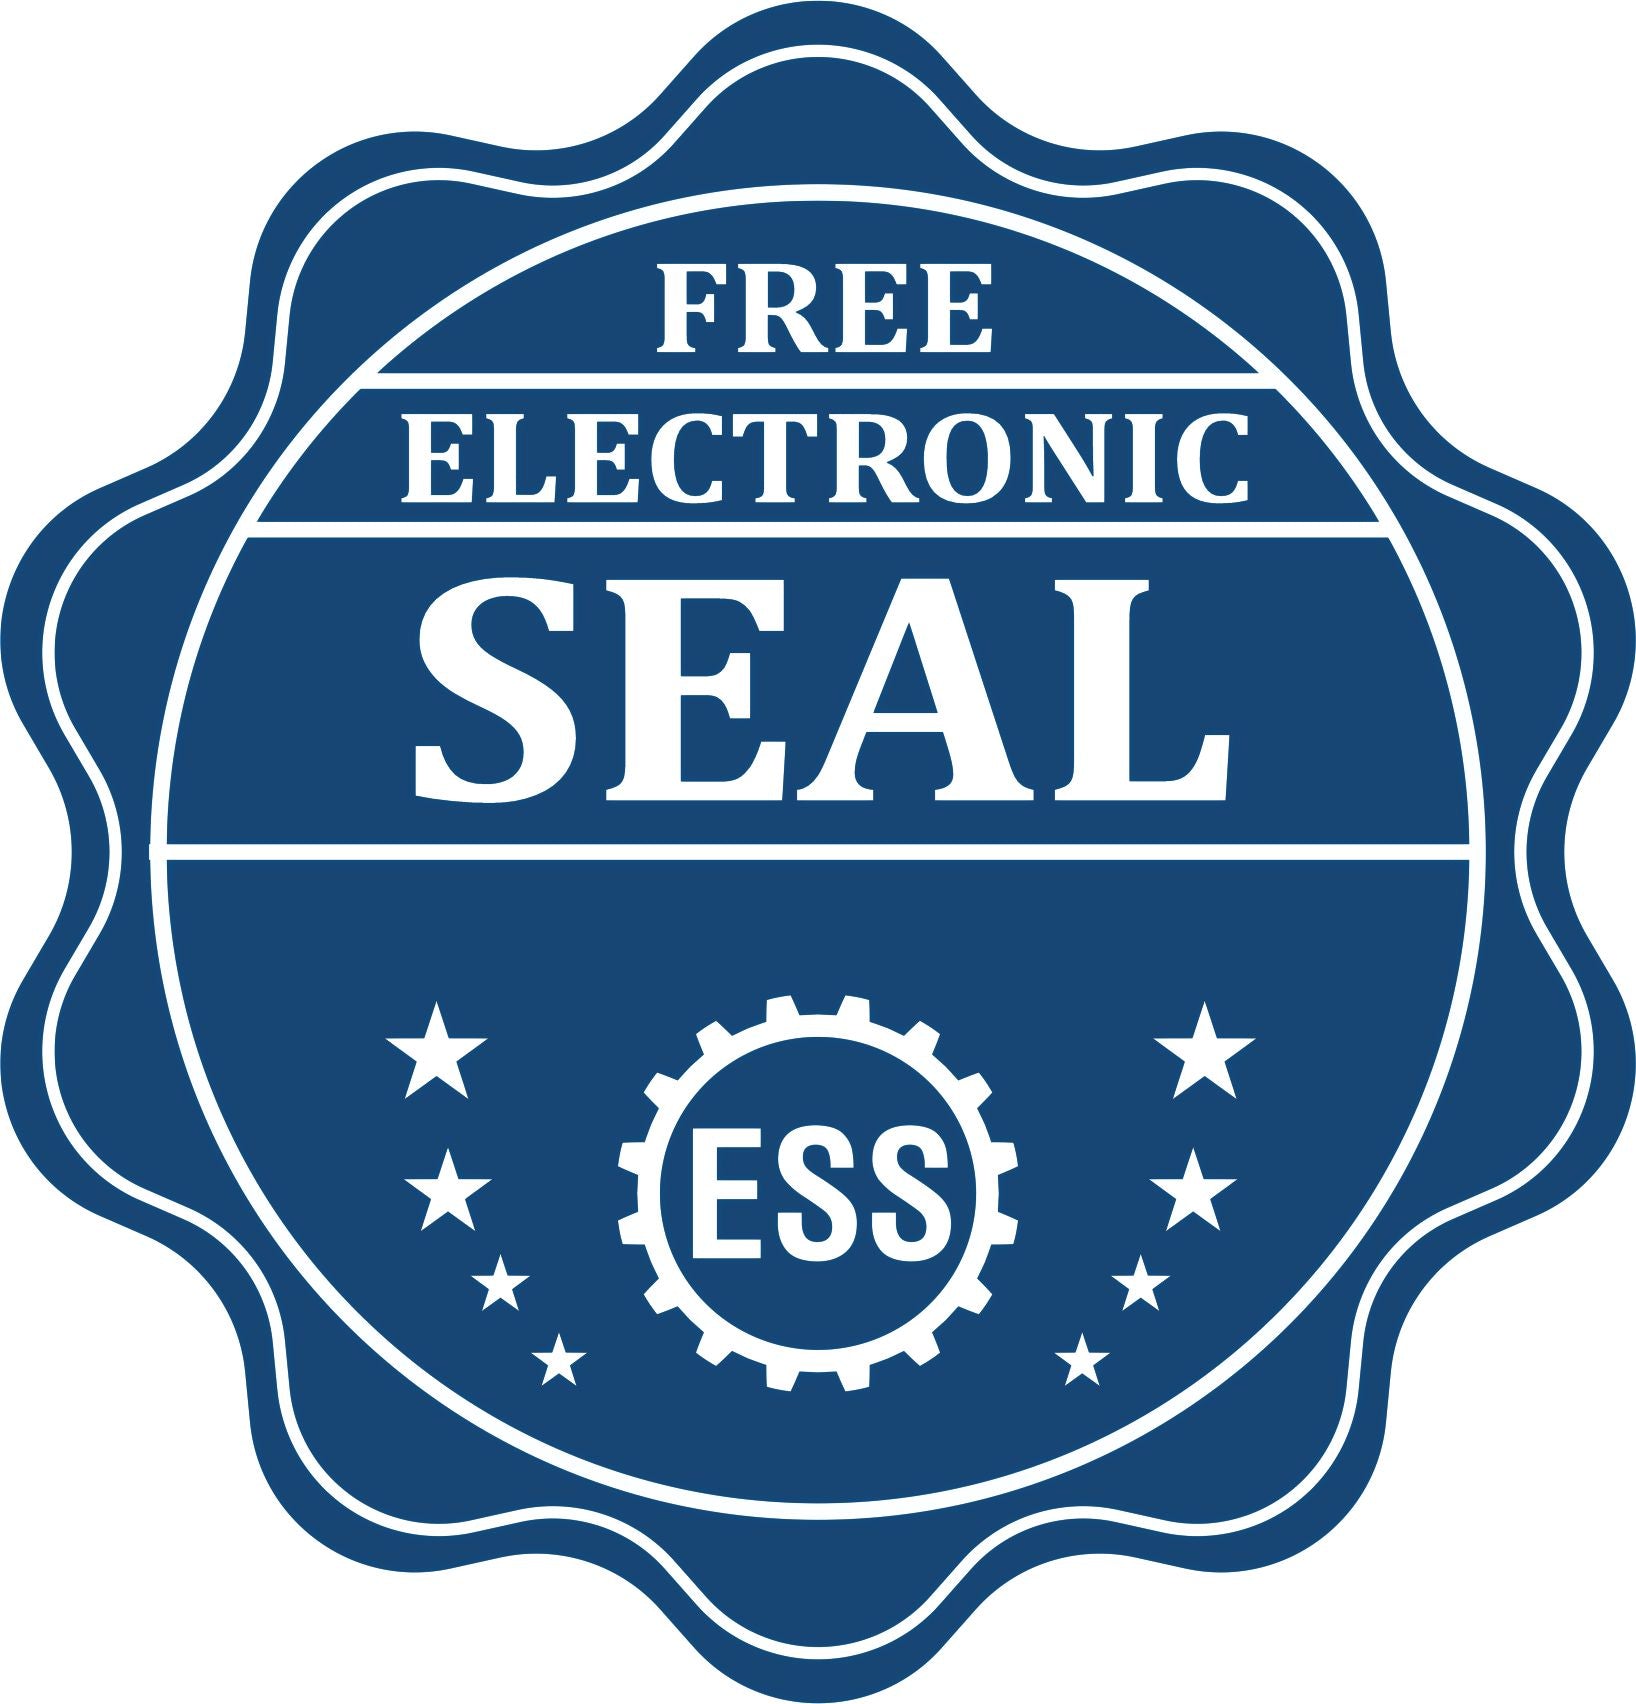 A badge showing a free electronic seal for the Kentucky Long Reach Landscape Architect Embossing Stamp with stars and the ESS gear on the emblem.